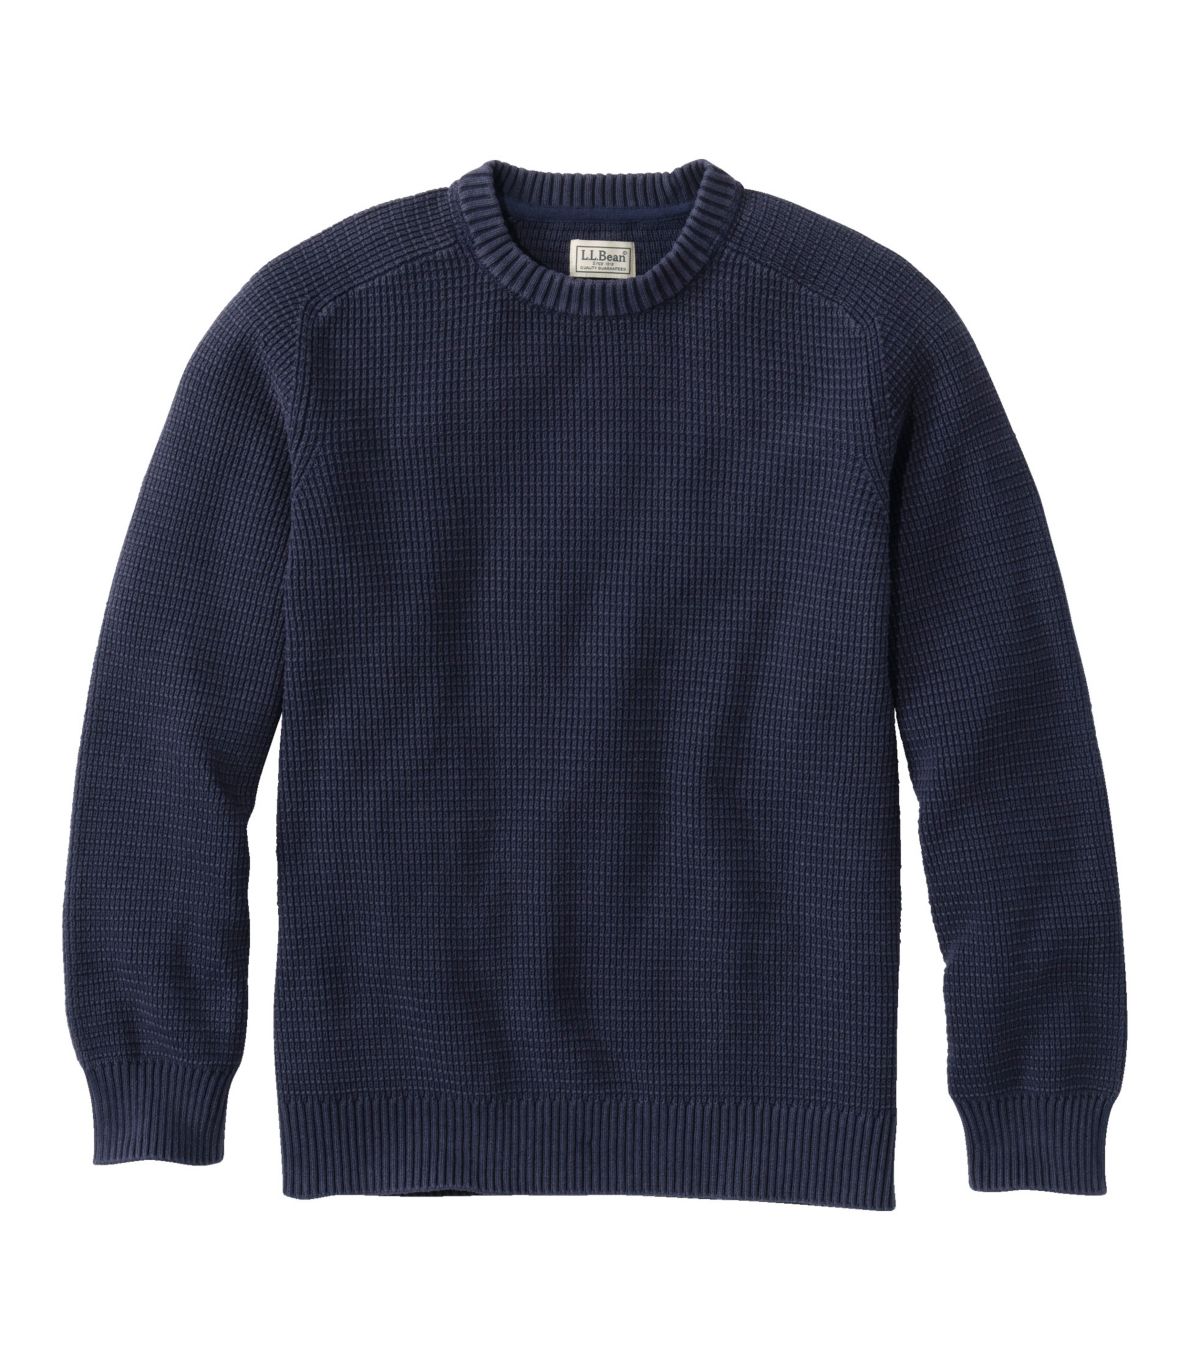 Men's Textured Washed Cotton Sweaters, Crewneck